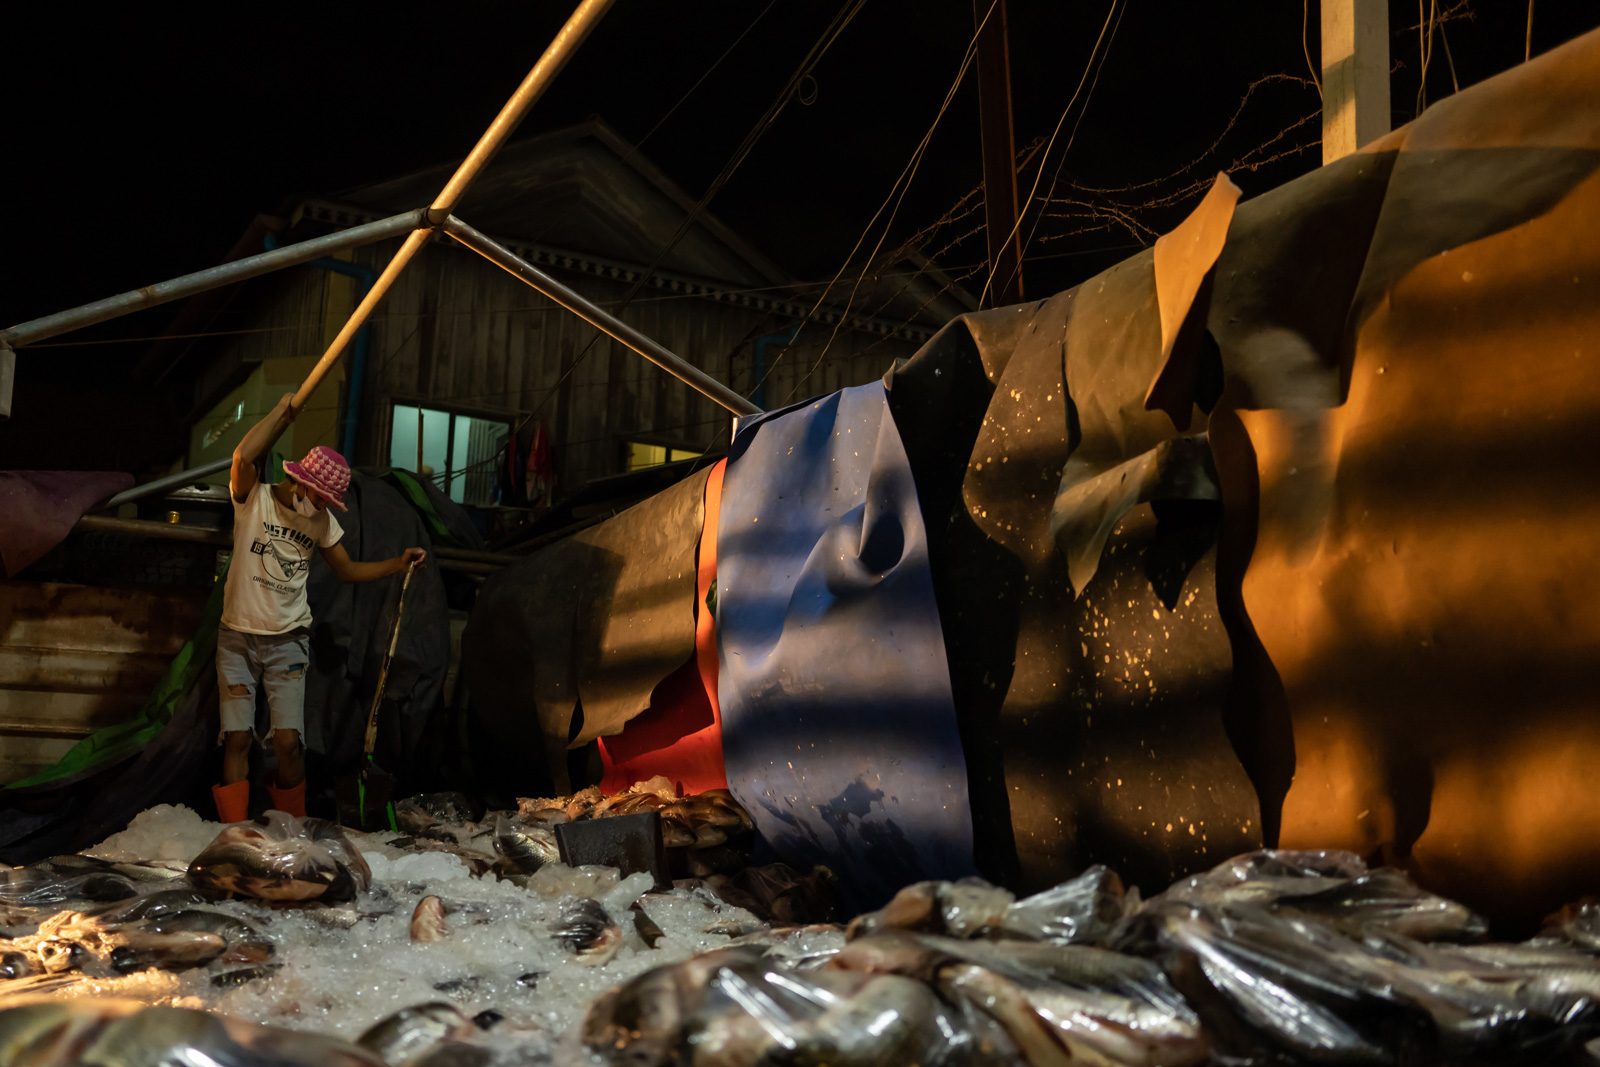 A worker offloads a truck importing fish from Vietnam to Cambodia at Phnom Penh’s Prek Pnov Market.